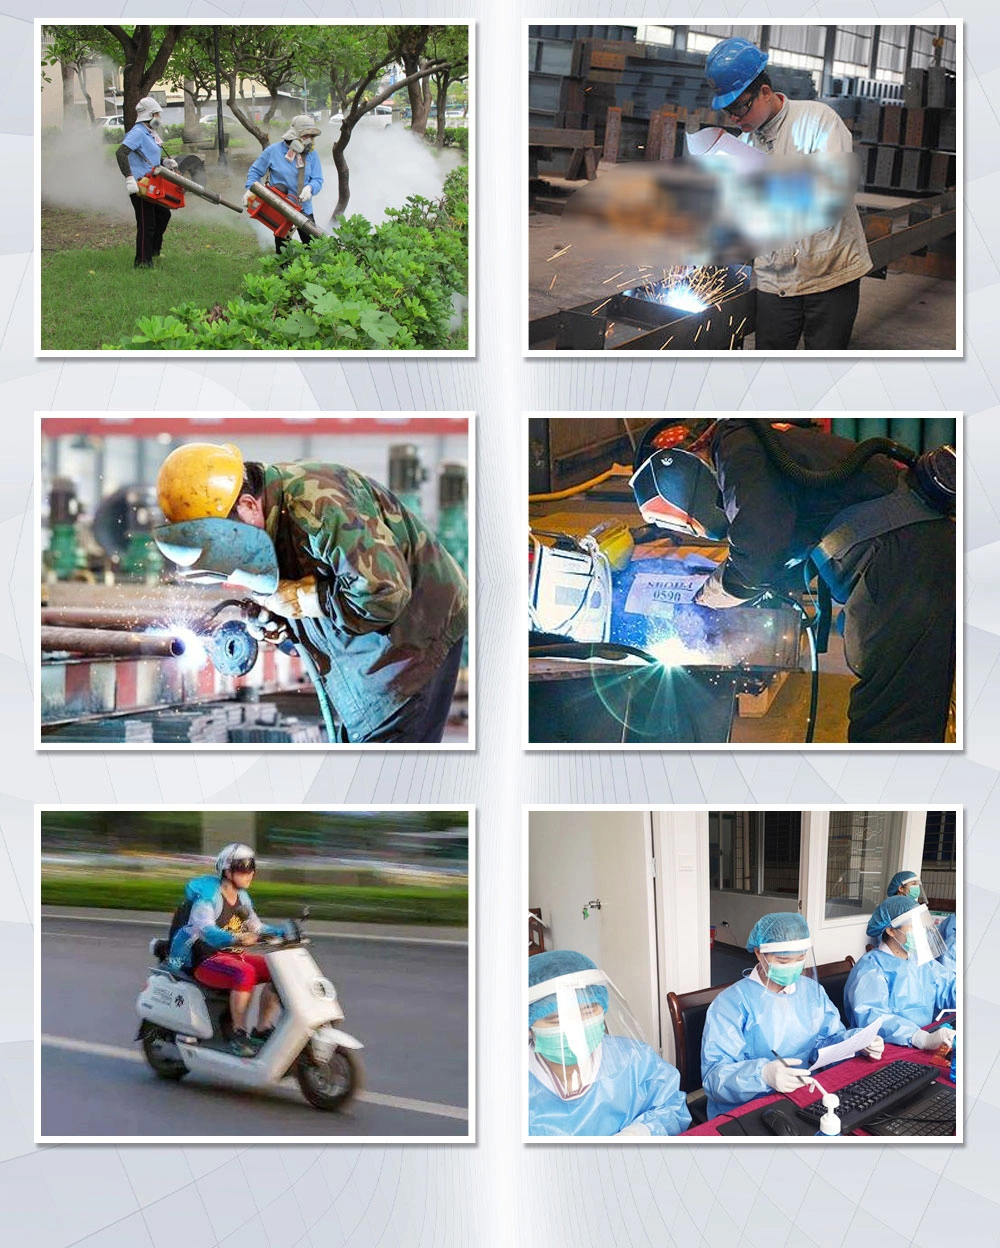 Wholesale Plexiglass Face Mask with Visor Shield Safety High Quality Custom Different Colors Adjustable Welding Mask